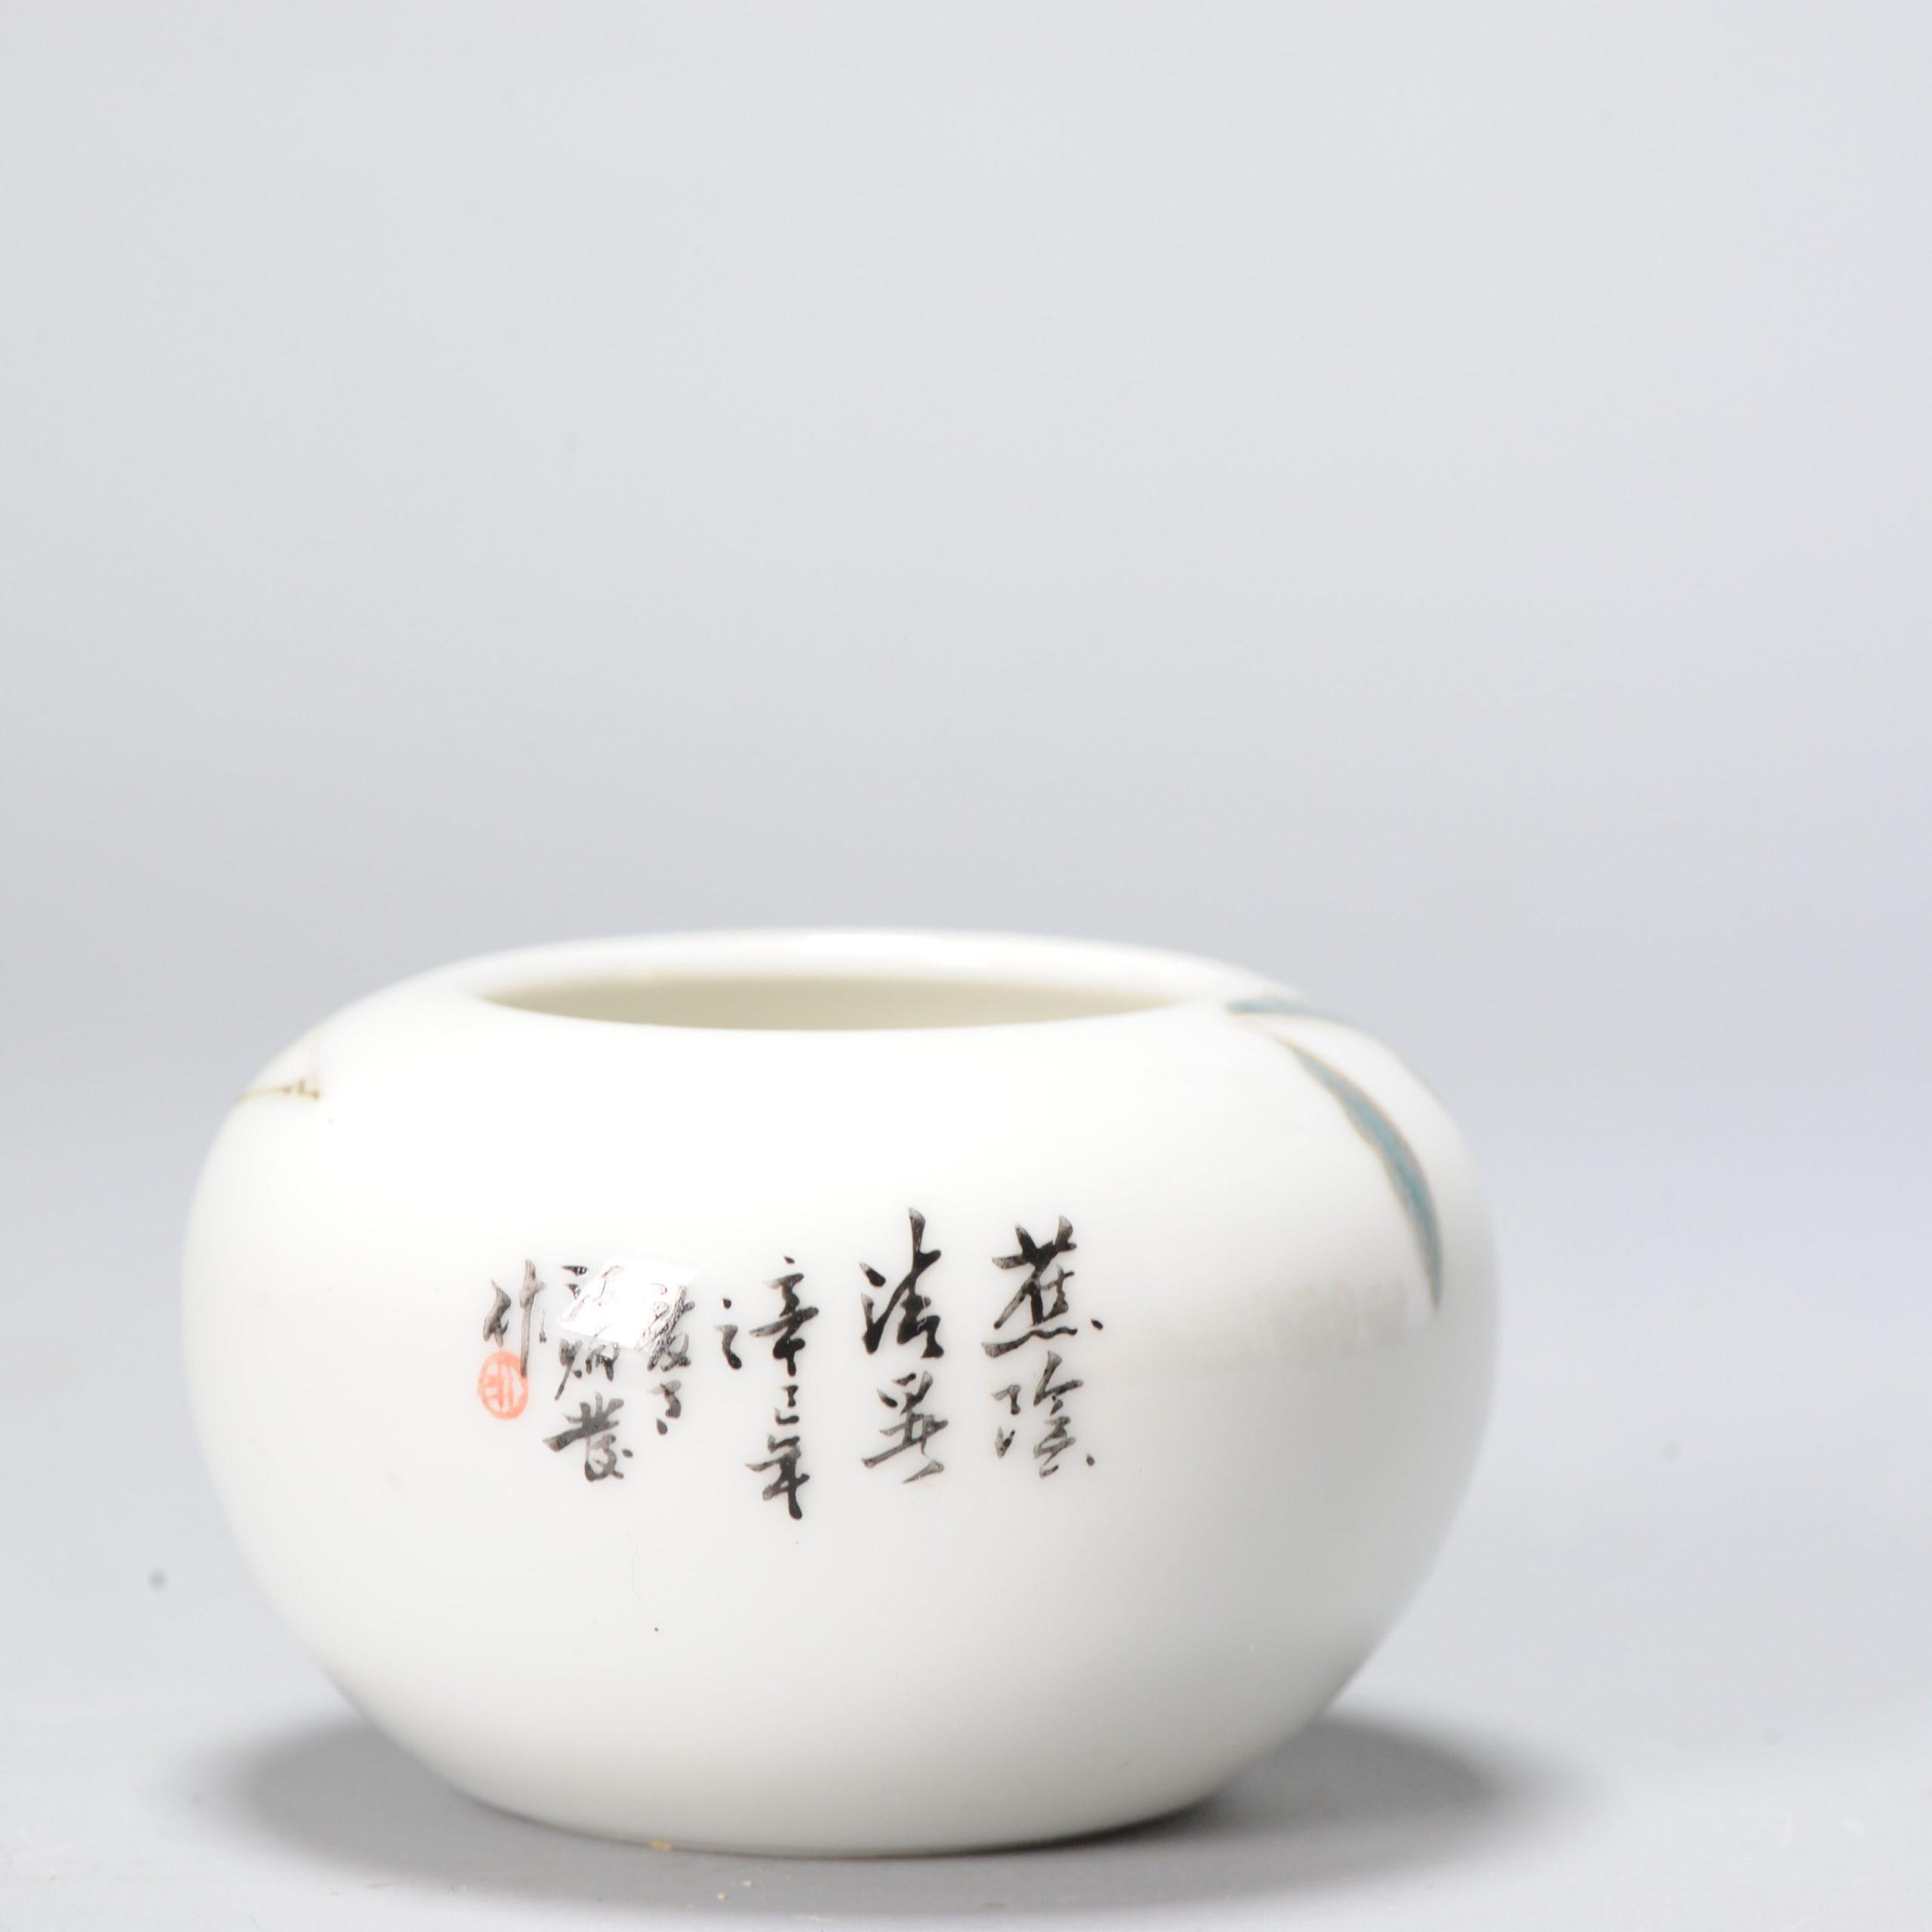 Lovely Chinese porcelain water pot of small size. With an unusual scene of a spider web in a garden. Also calligraphy. Dating to the 1980's or 90's. Marked at base.

Additional information:
Material: Porcelain & Pottery
Region of Origin: